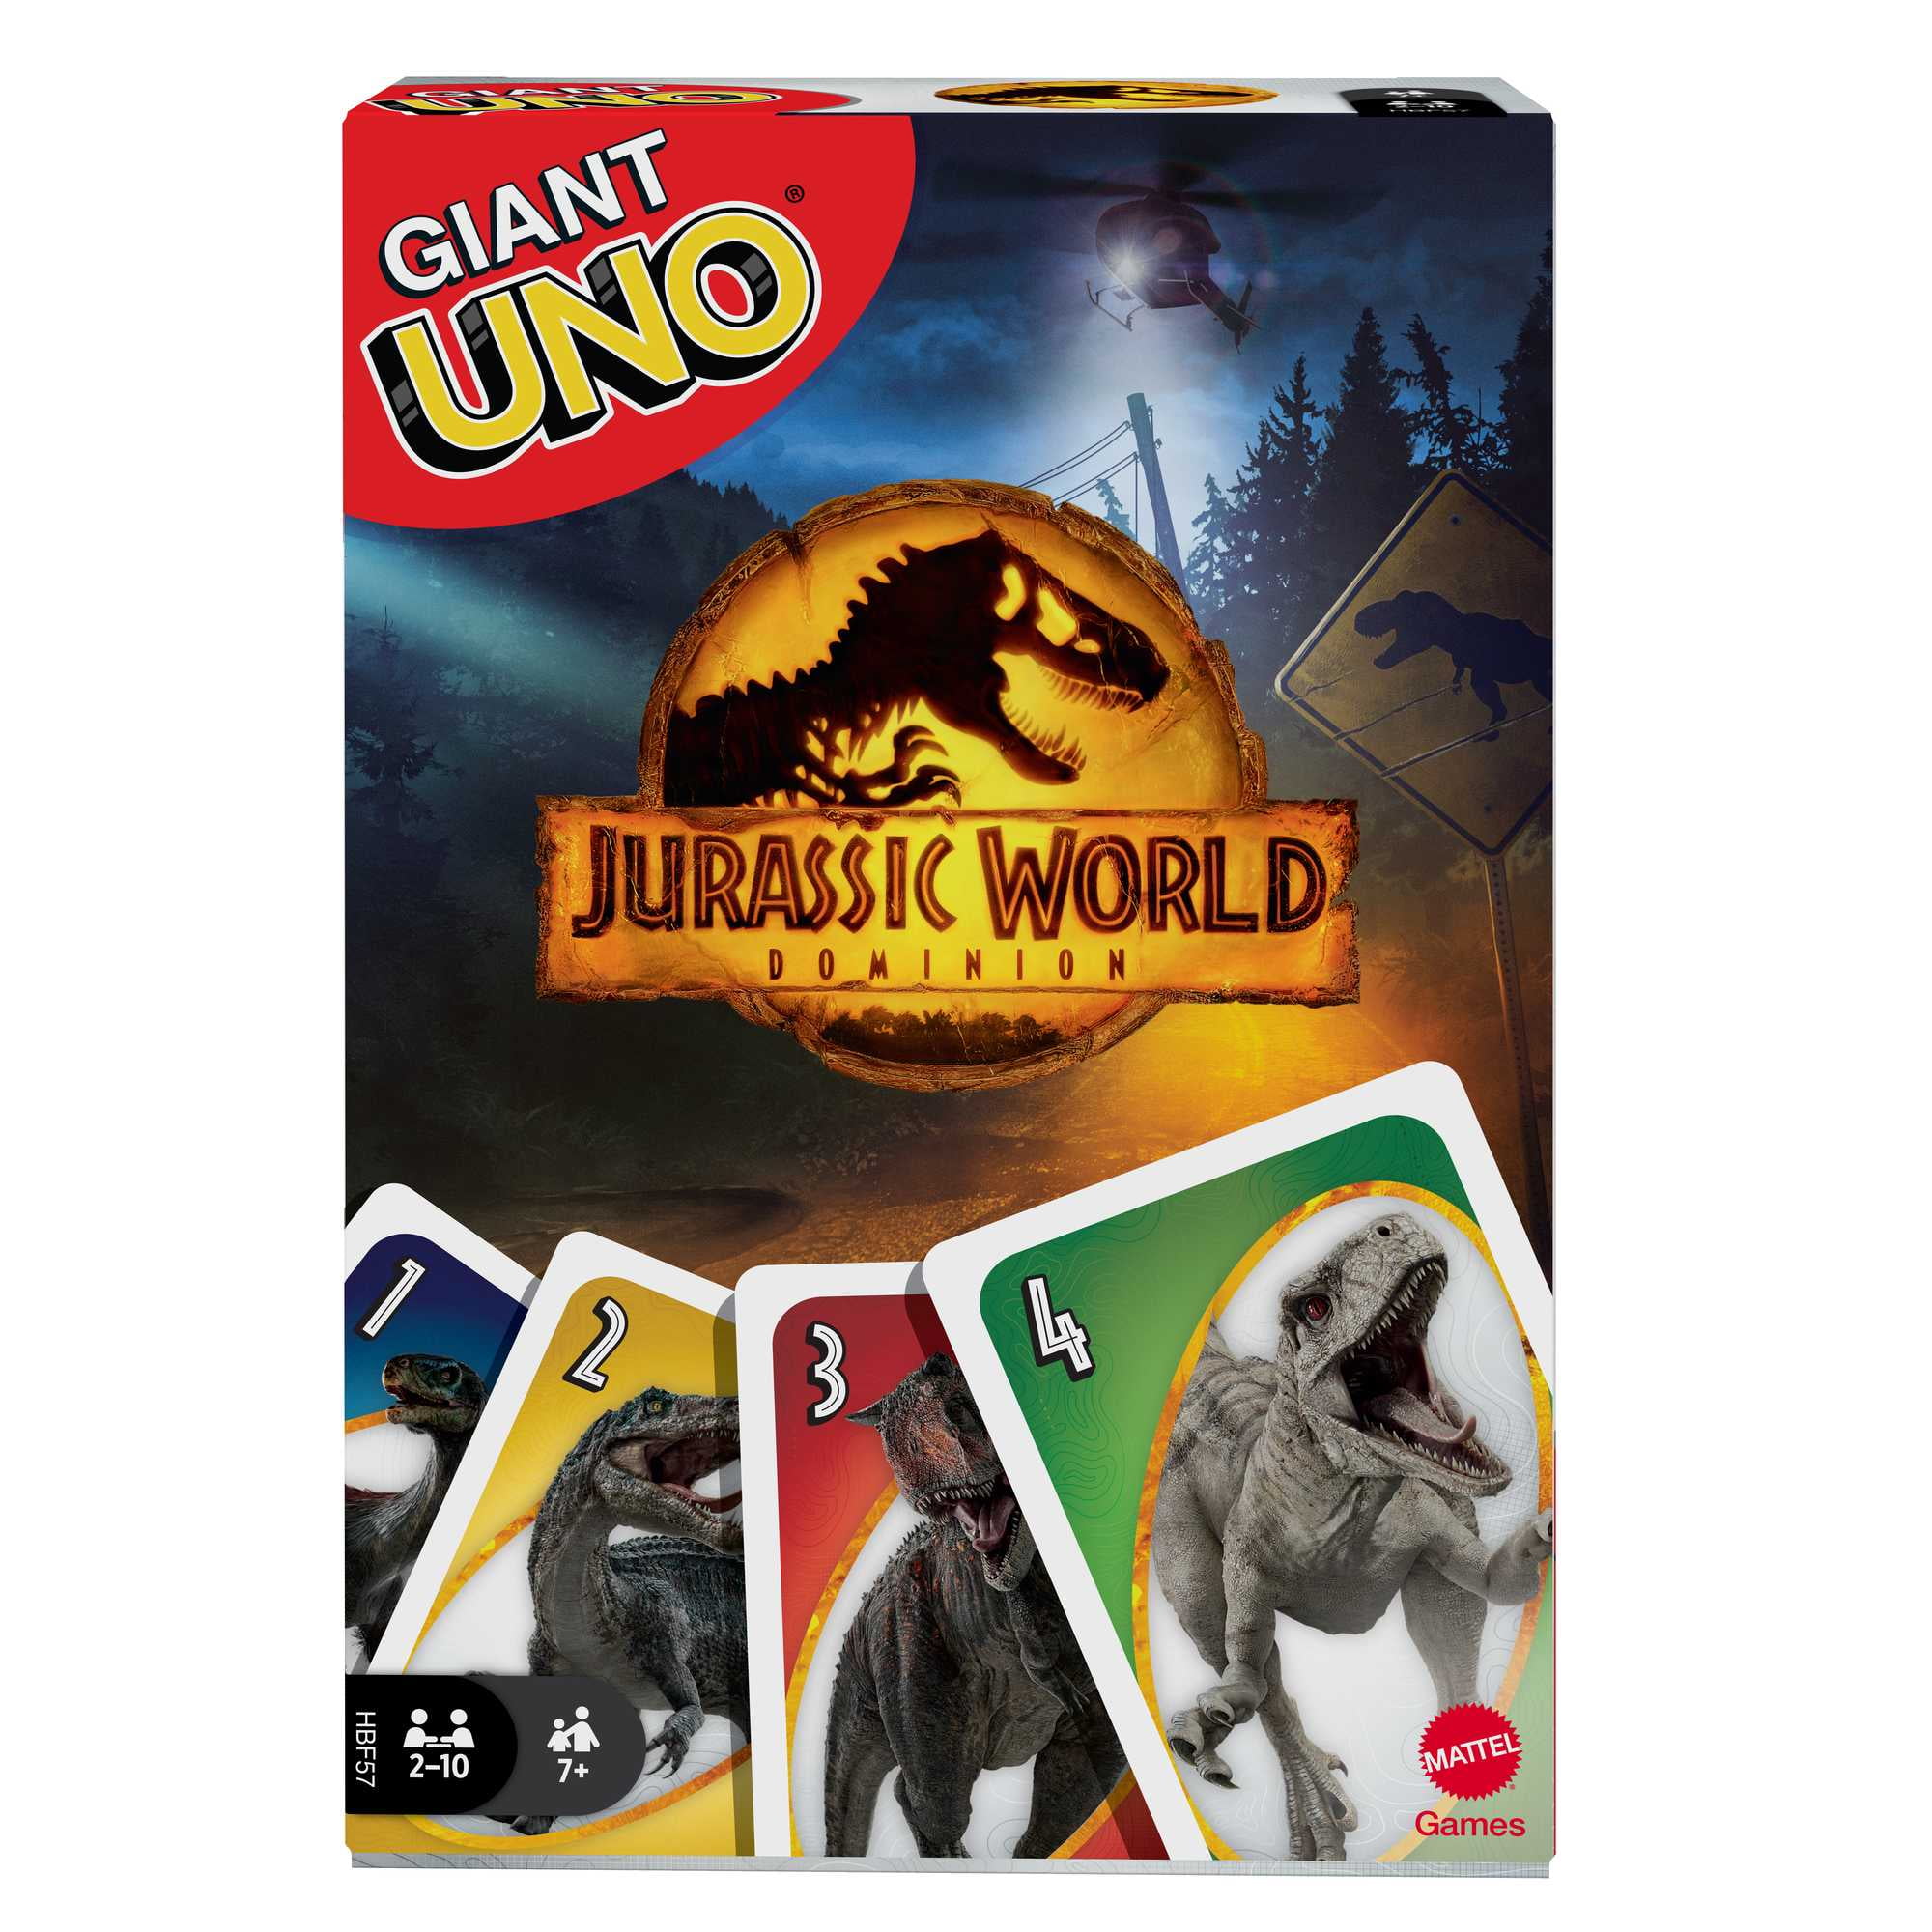 Giant UNO Jurassic World Dominion Family Card Game $9.61 + Free Shipping w/ Prime or on $35+